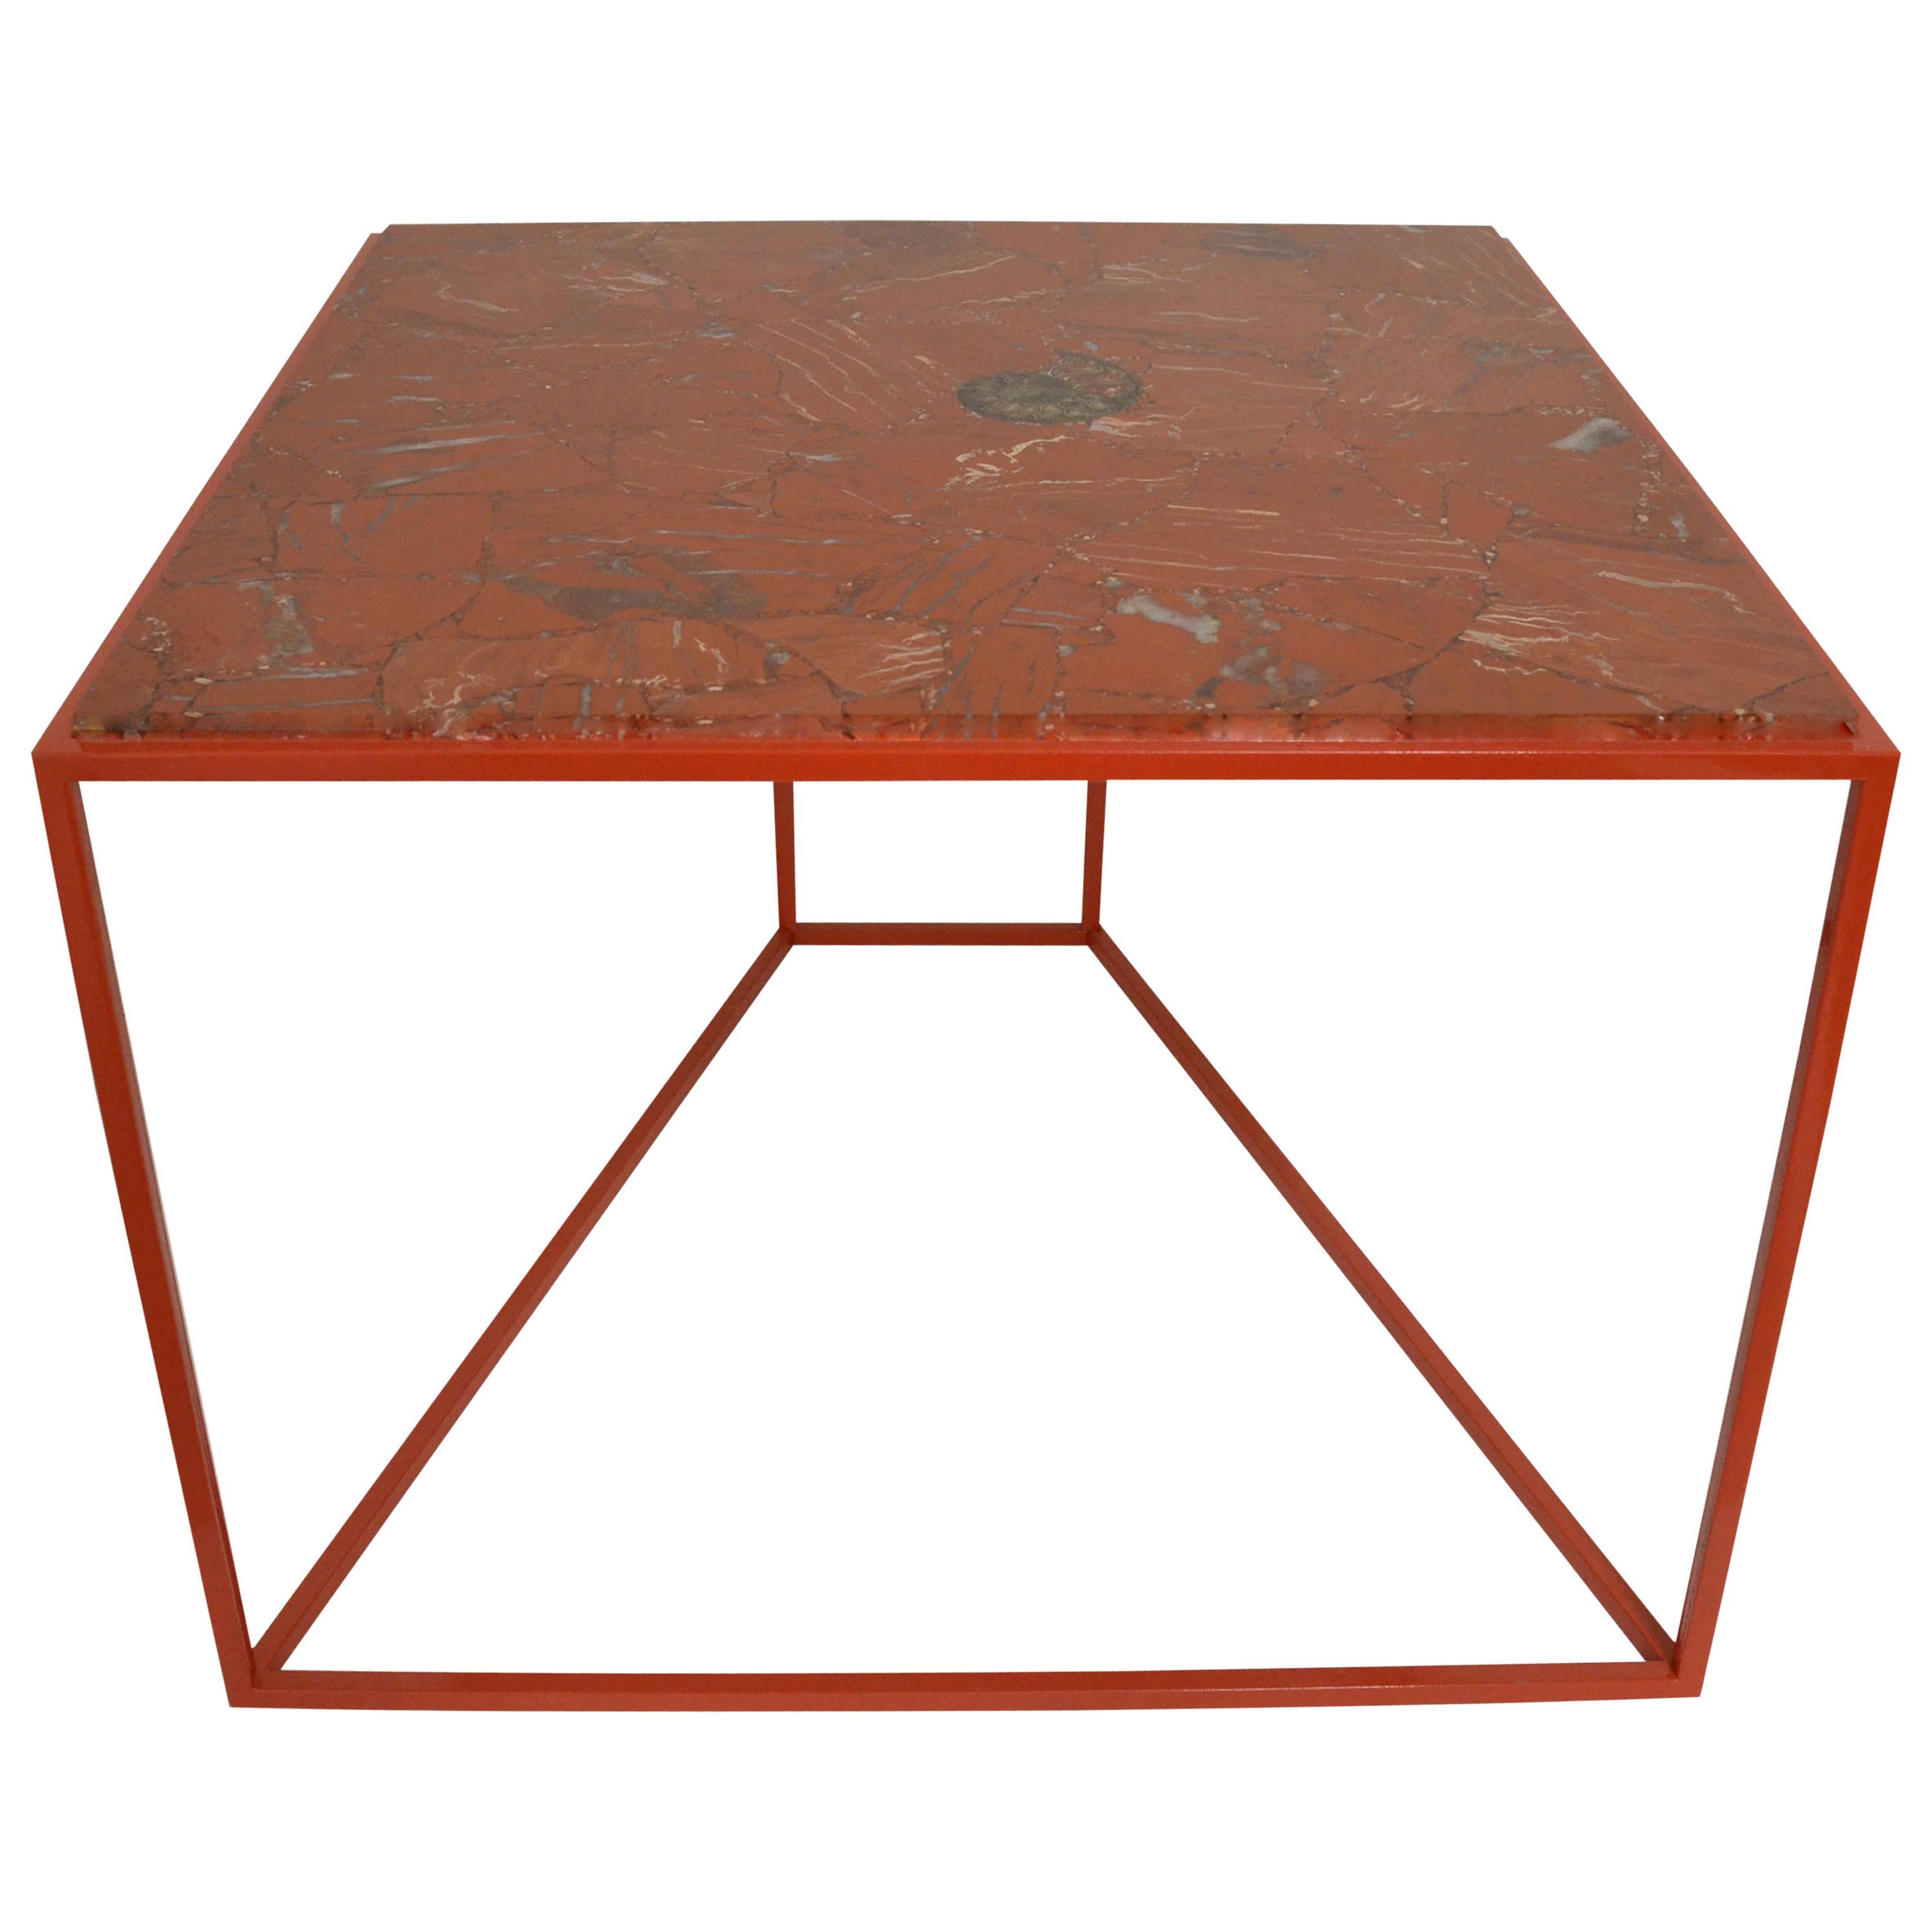 'Cubic' Square Red Jasper Gemstone Cocktail / Coffee / Centre Table im Angebot